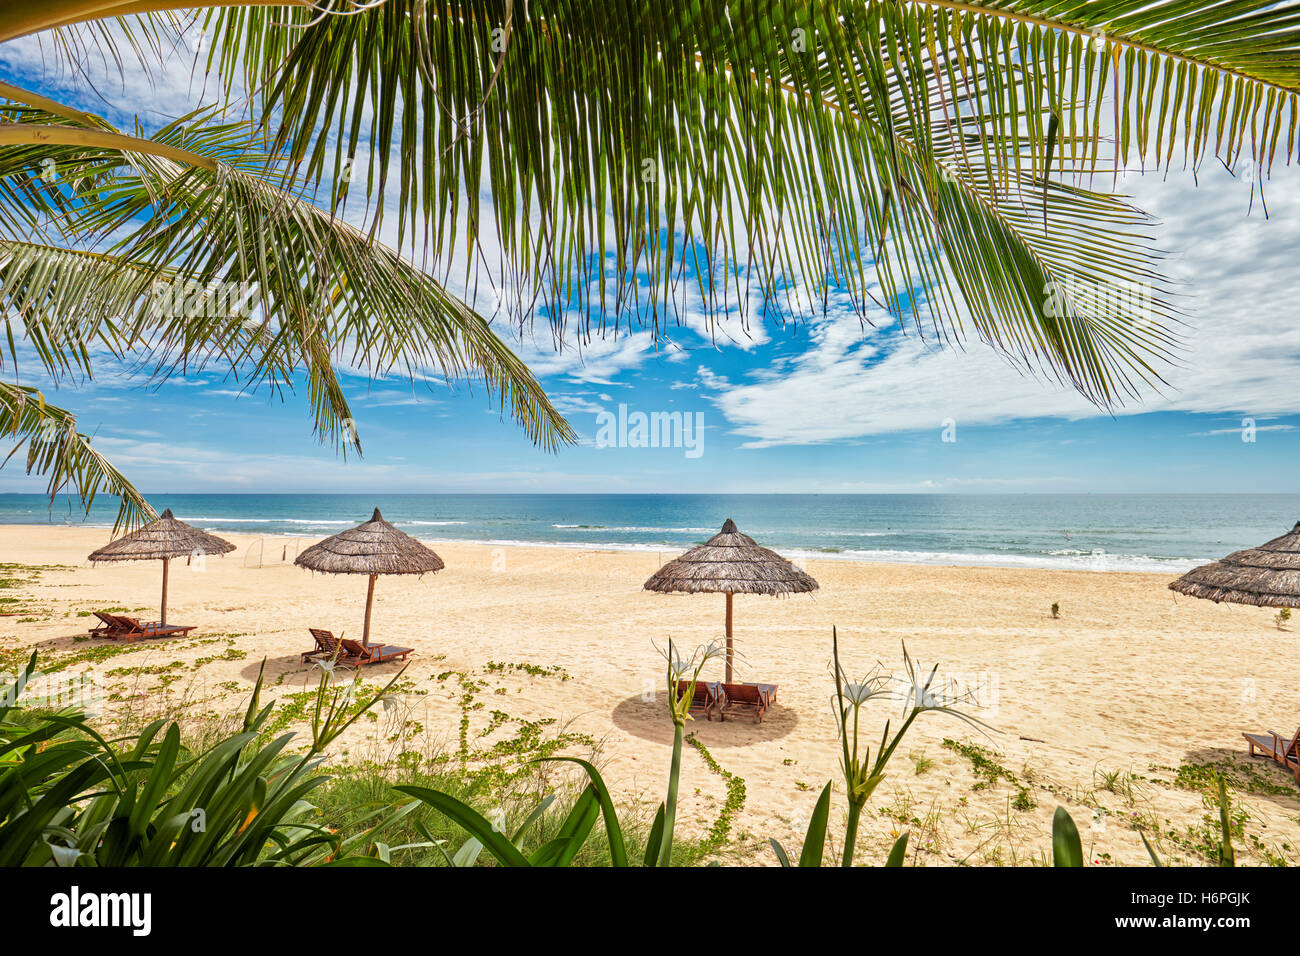 View of the Lang Co Beach. Thua Thien Hue Province, Vietnam. Stock Photo